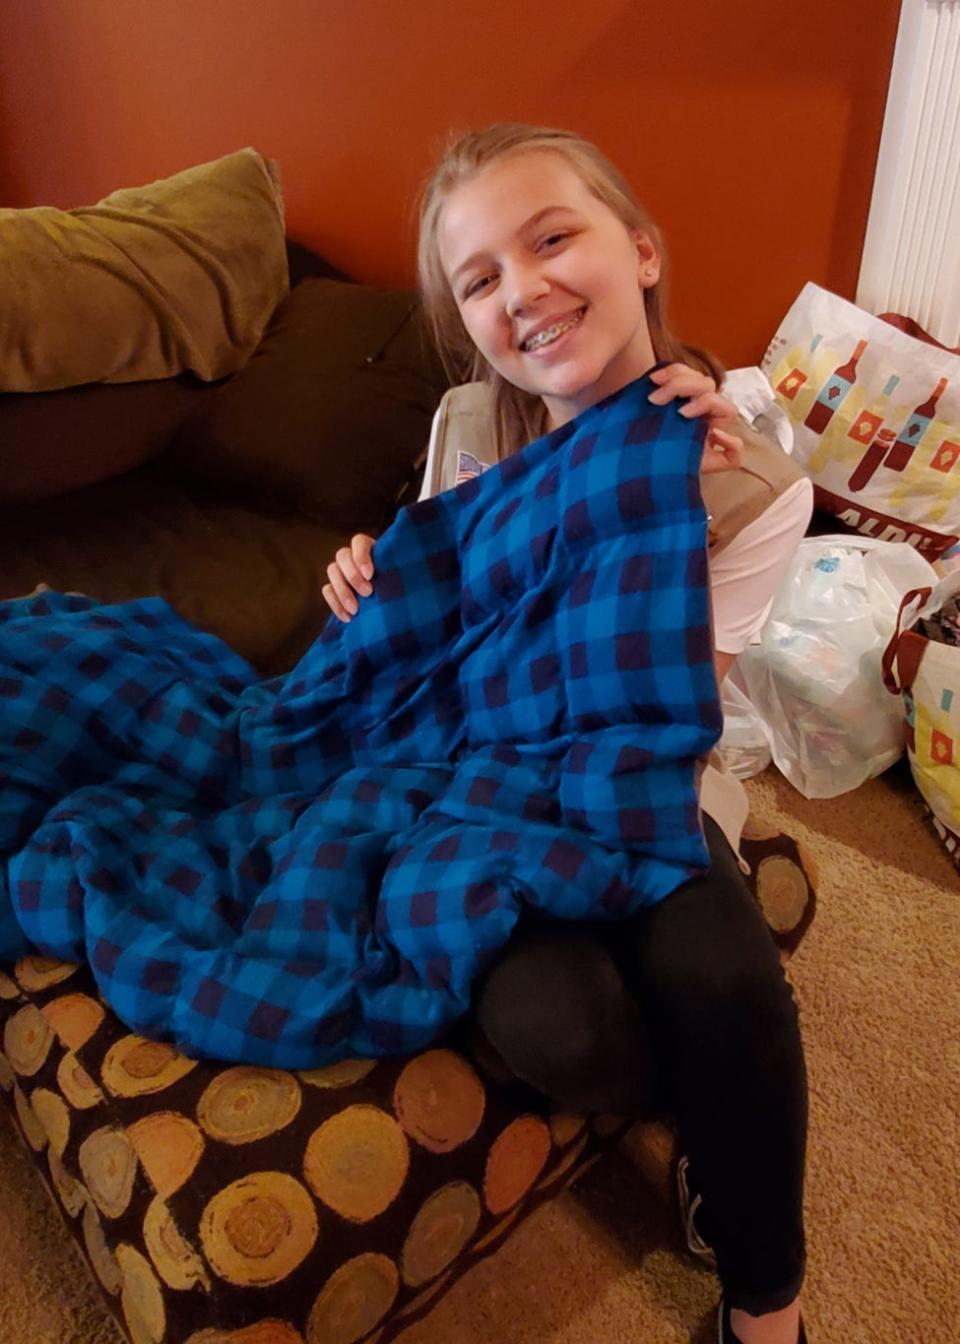 Avery Hanson works on a weighted blanket in Karns in 2019.